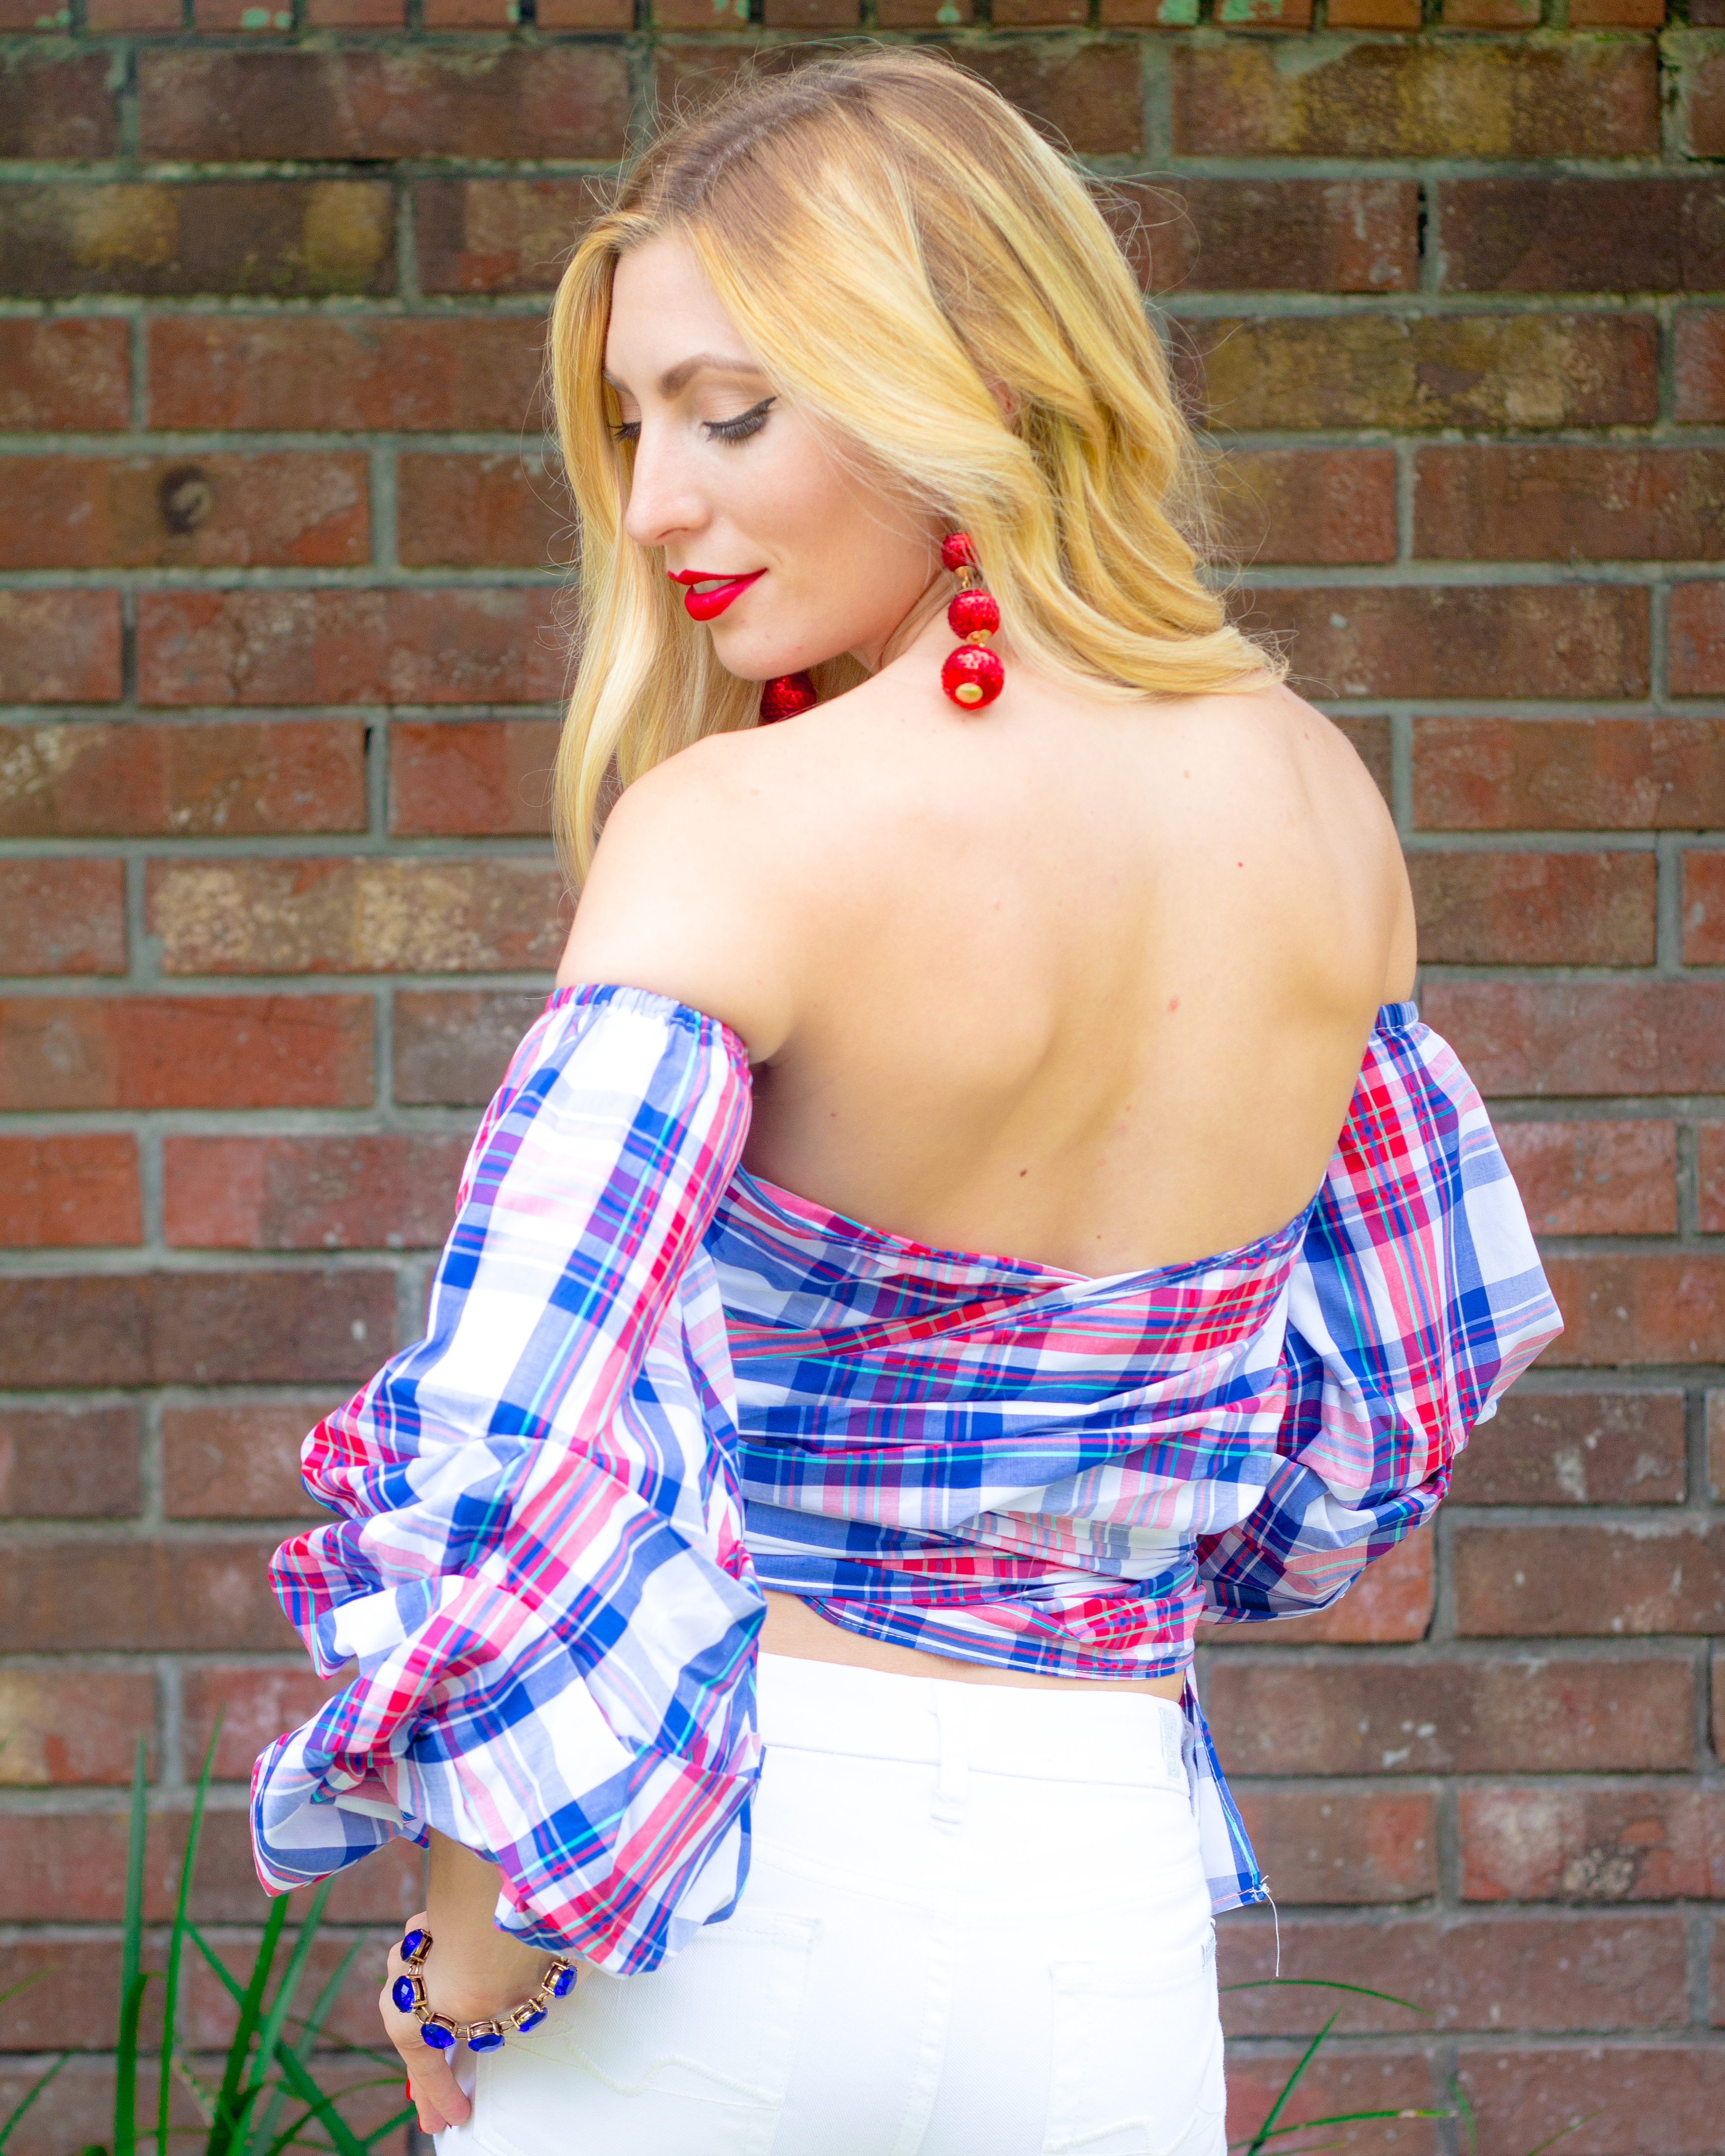 4TH OF JULY OOTD RED, WHITE, AND BLUE